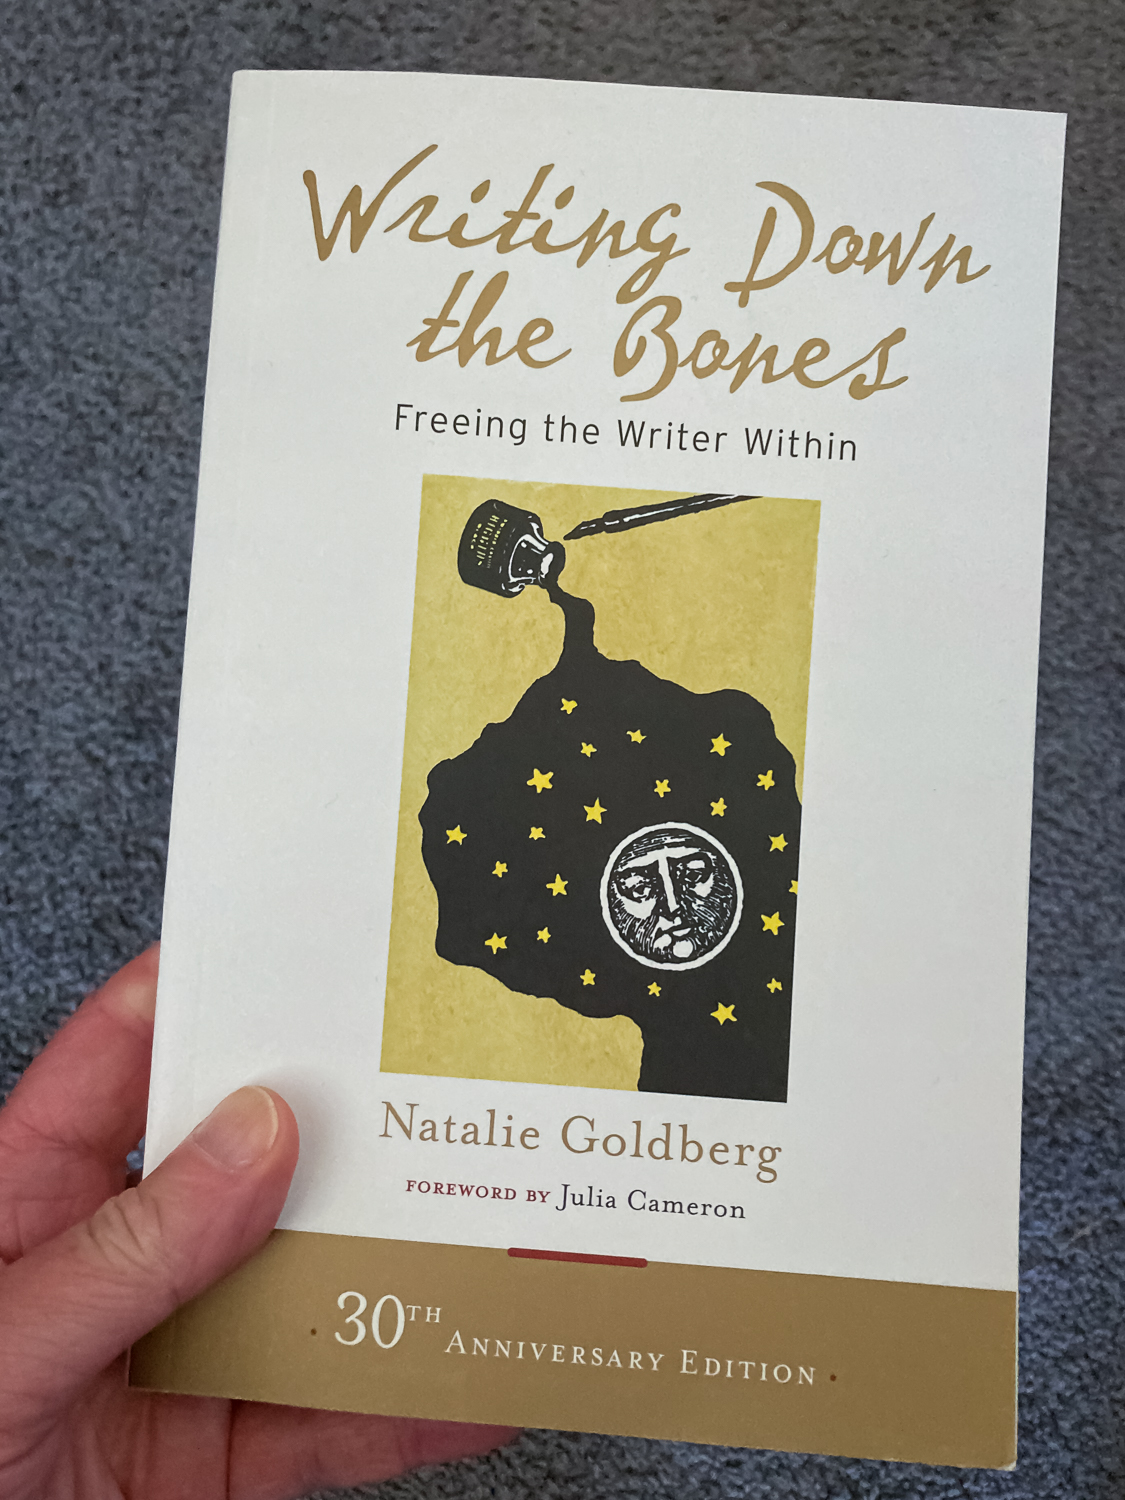 A hand holding the book Writing Down The Bones by Natalie Goldberg